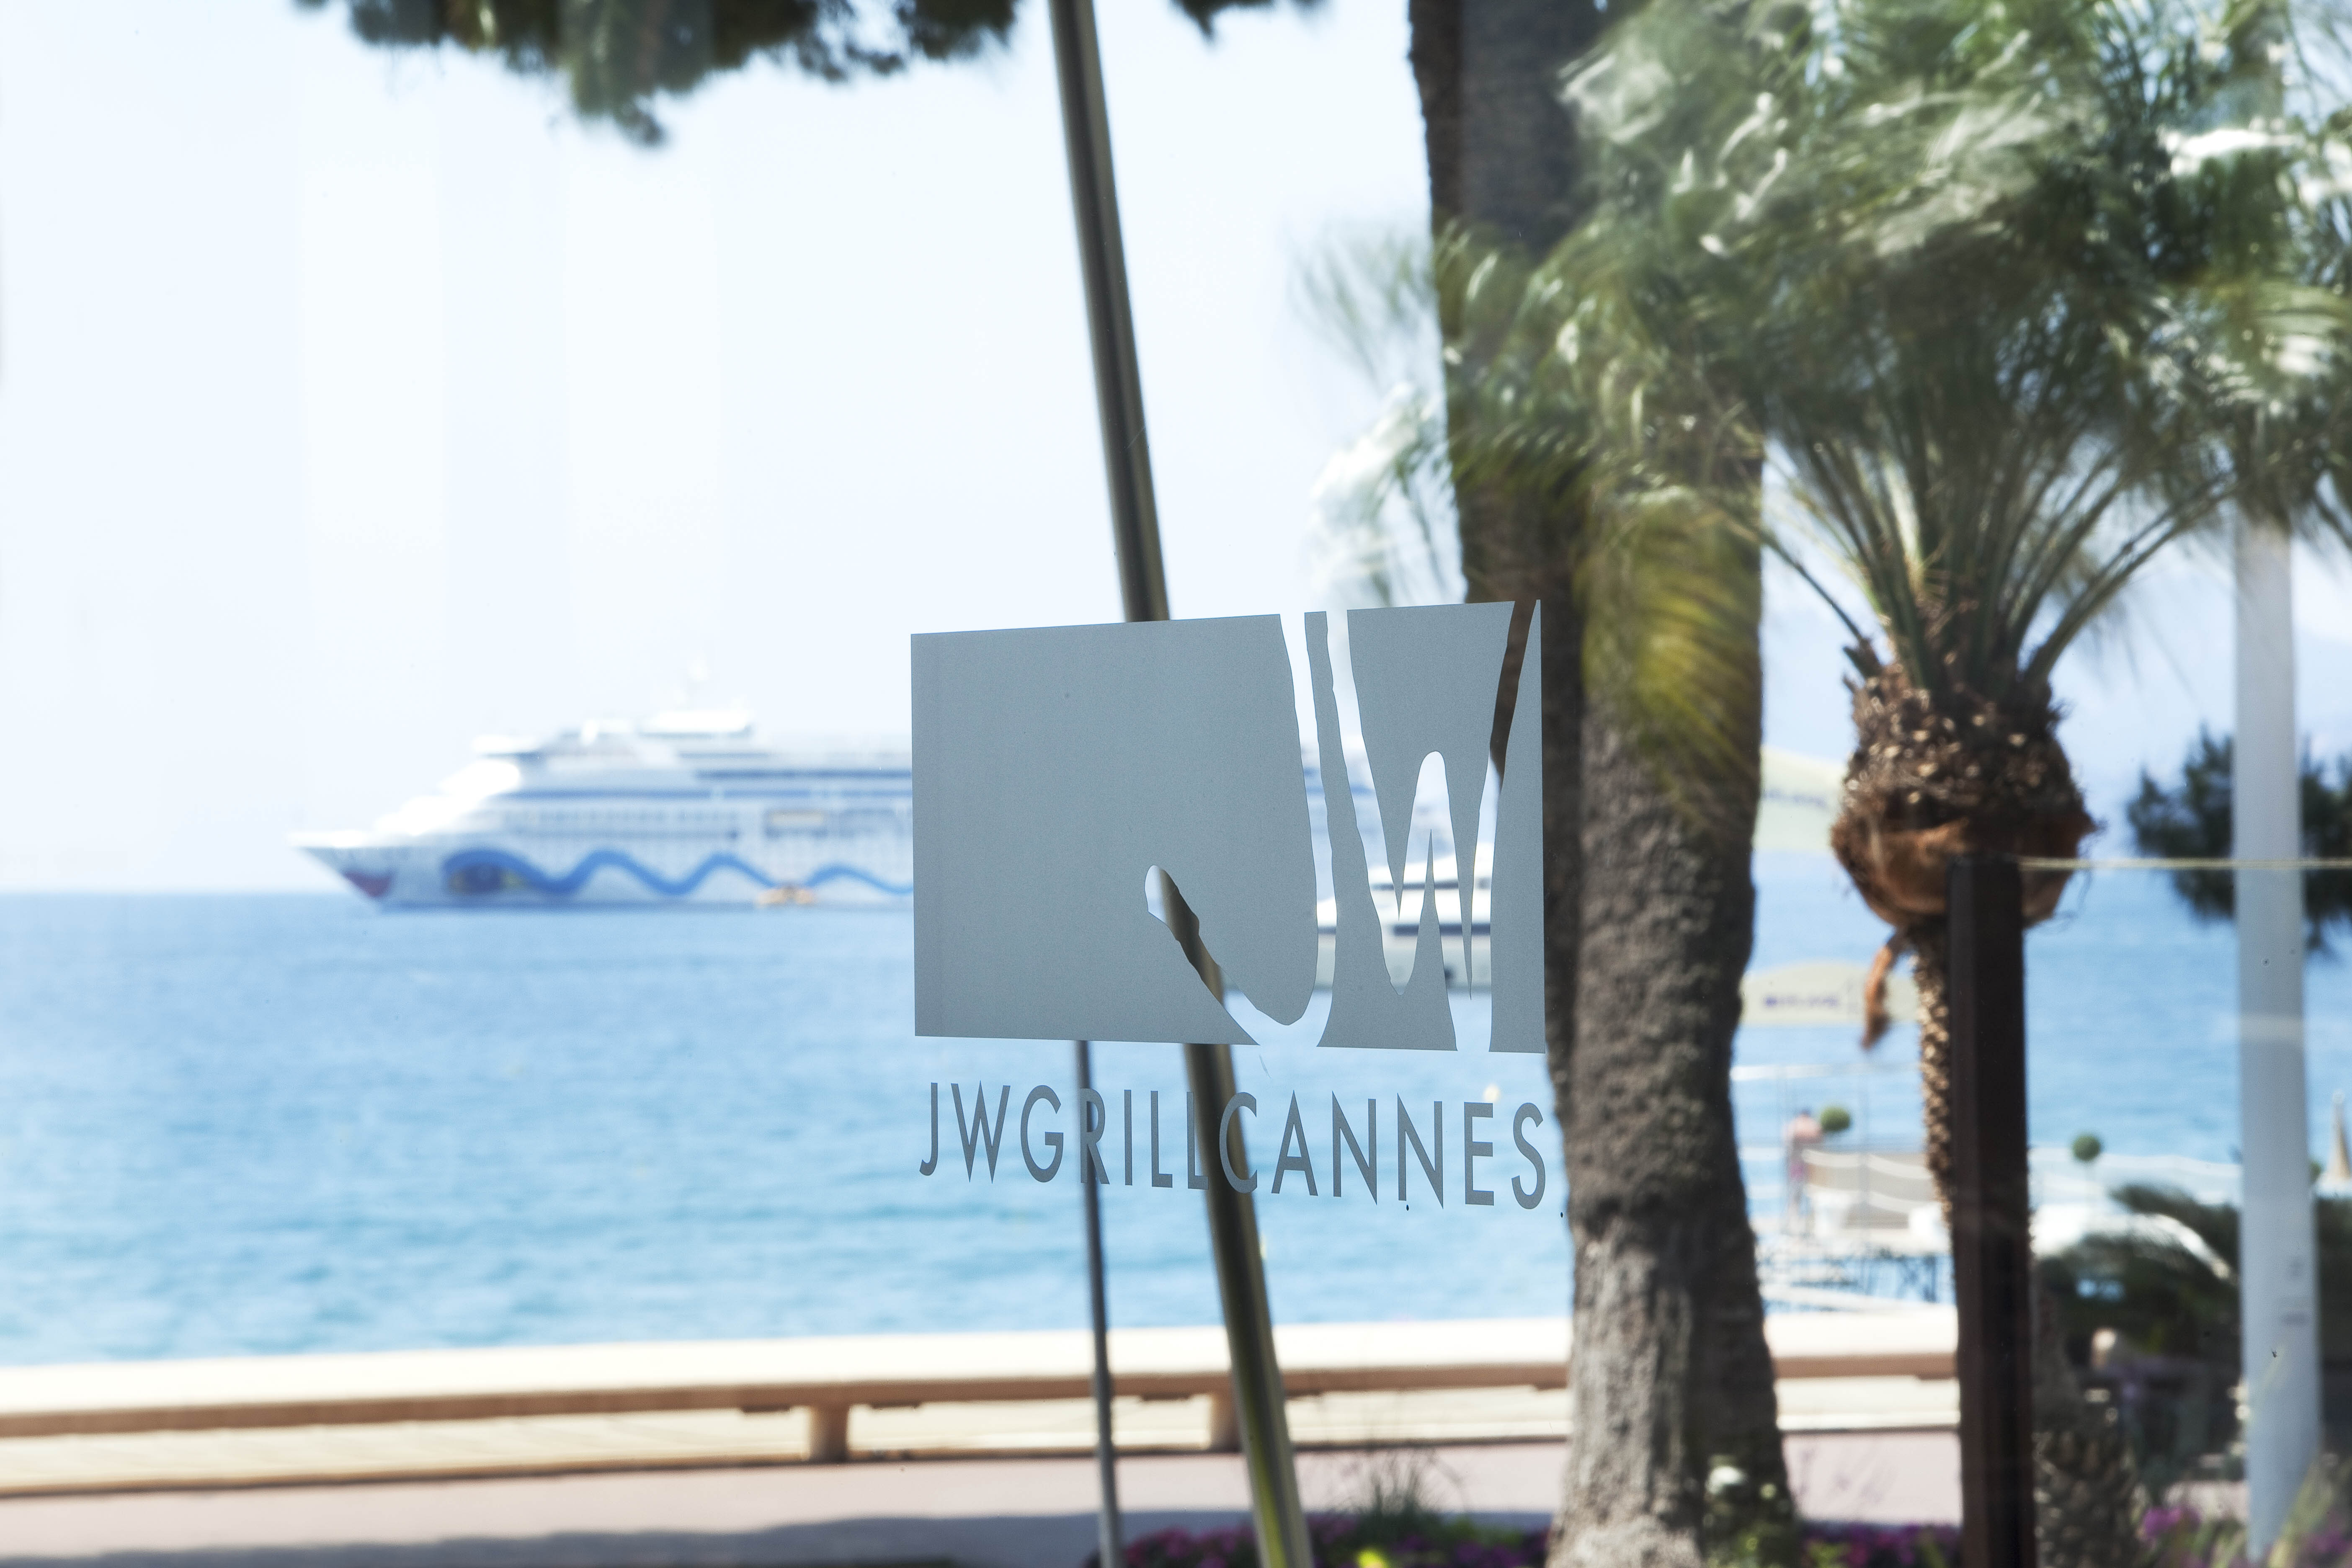 jw-cannes-france-le-grill-28-md.jpg